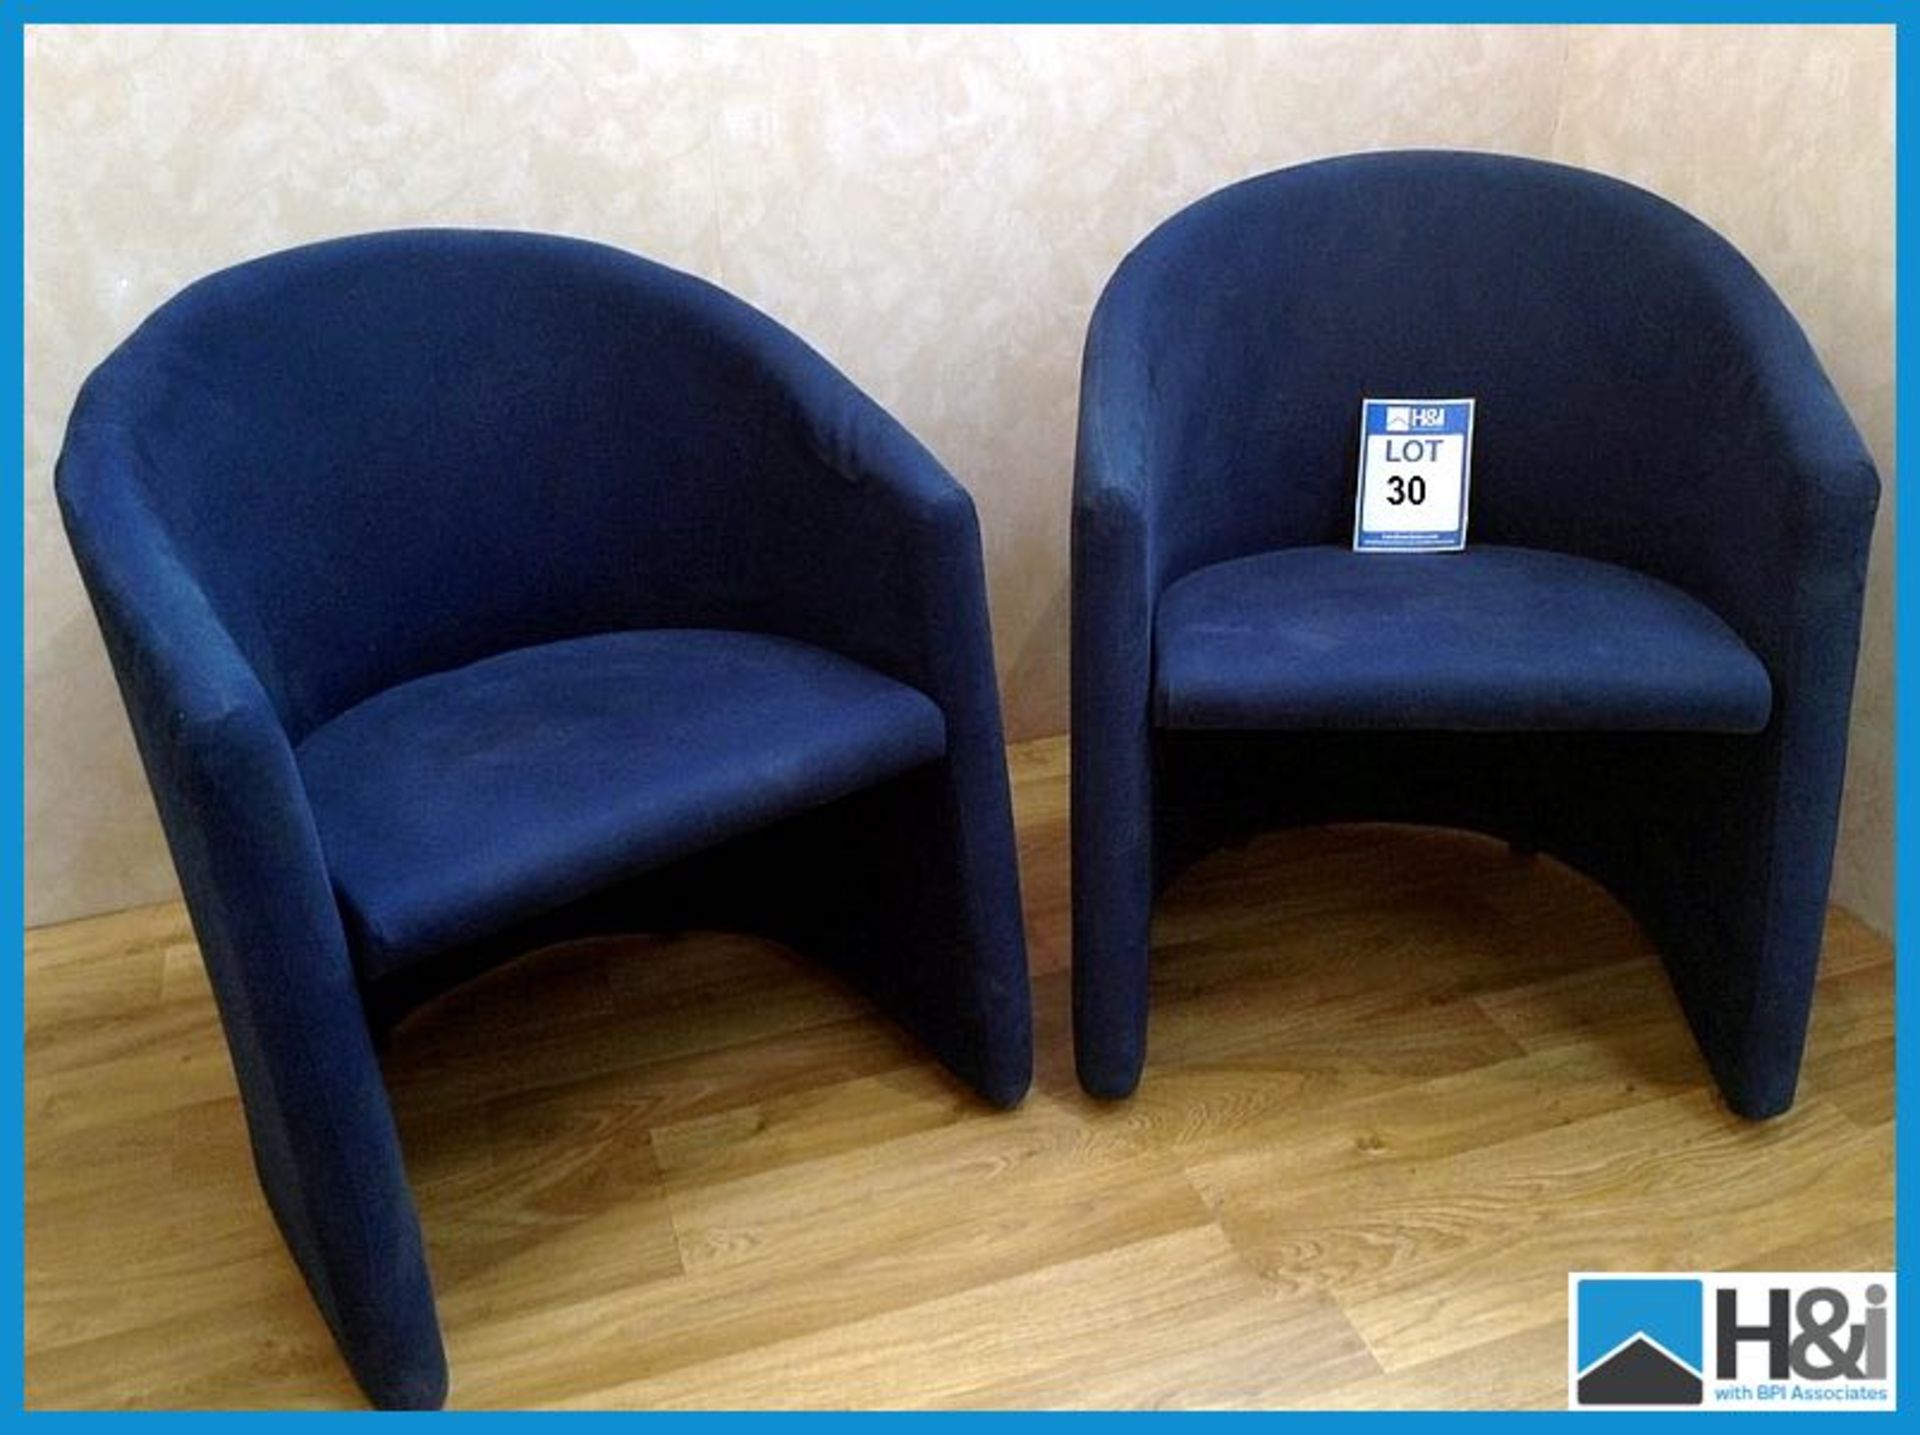 2 x Caen single seater blue office chairs -L15 Appraisal: Good Serial No: NA Location: Identihire,